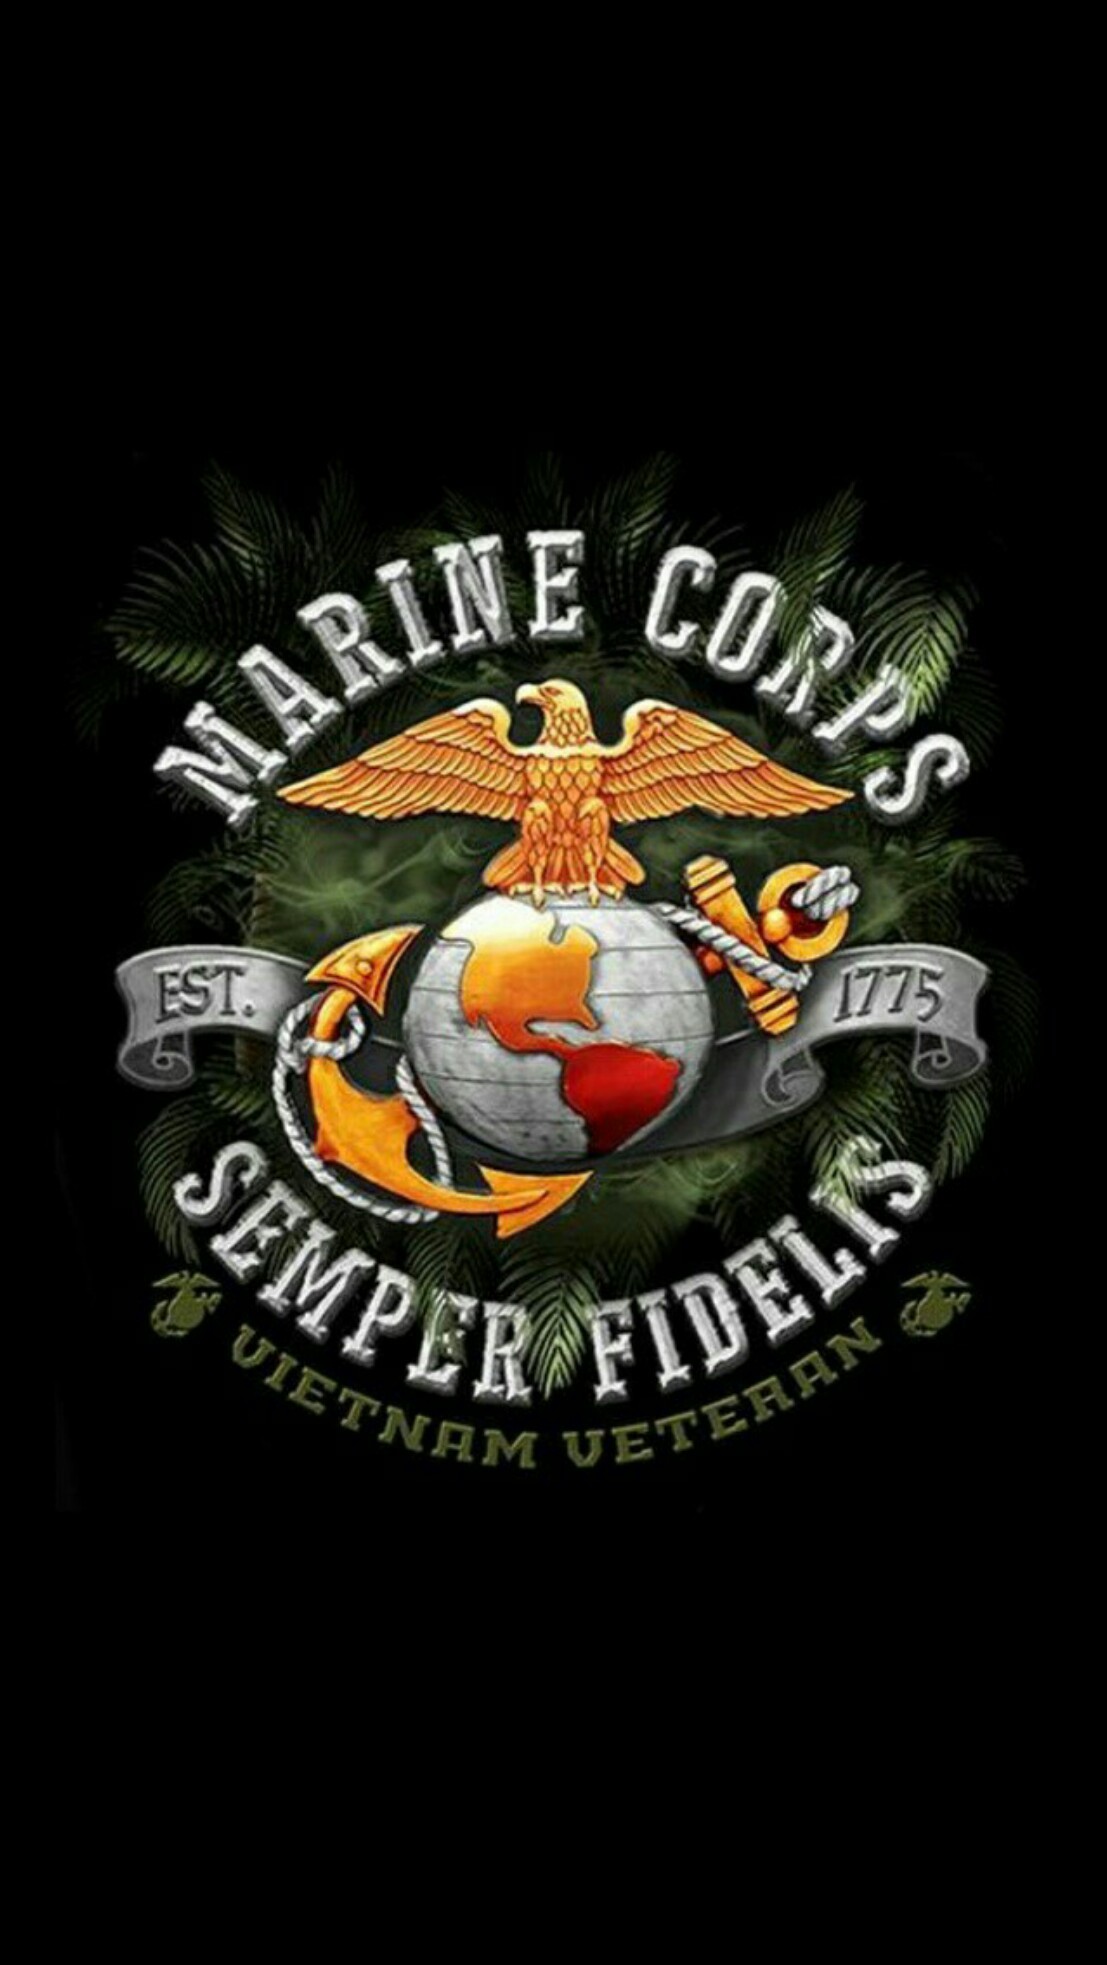 USMC Wallpaper for iPhone 52 images